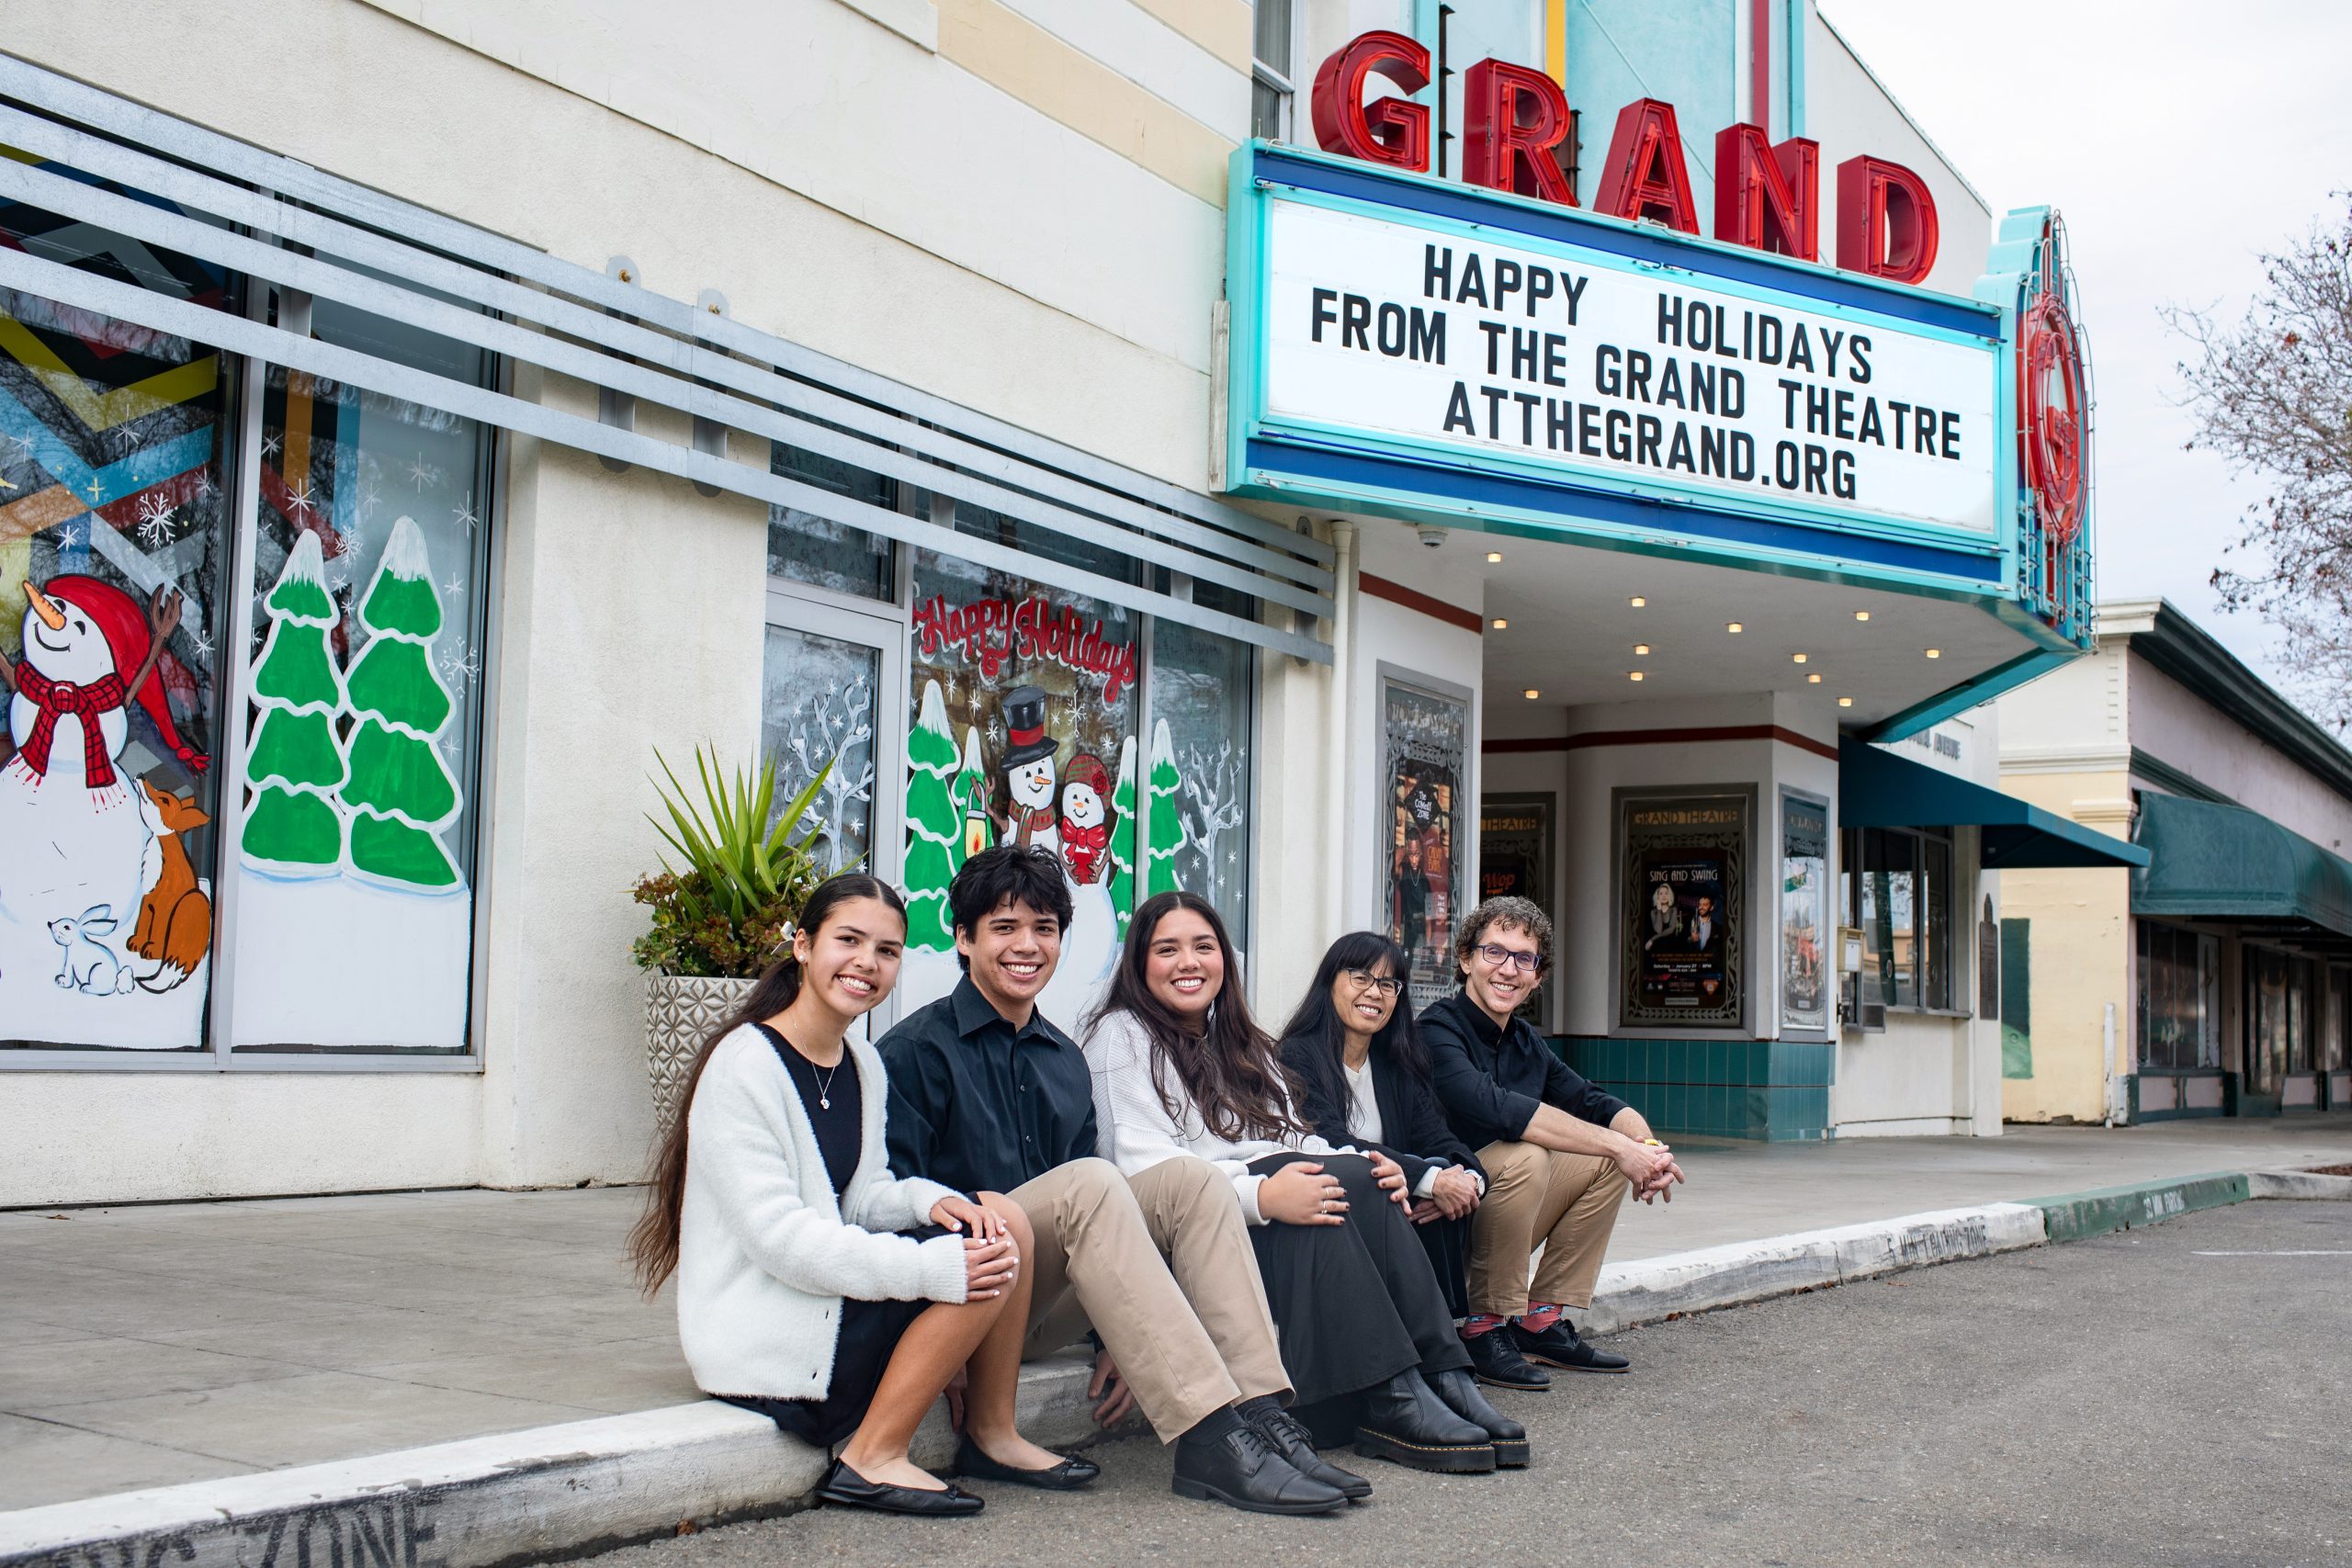 Dr Trosien and his family smiling in front of the Grand Theatre